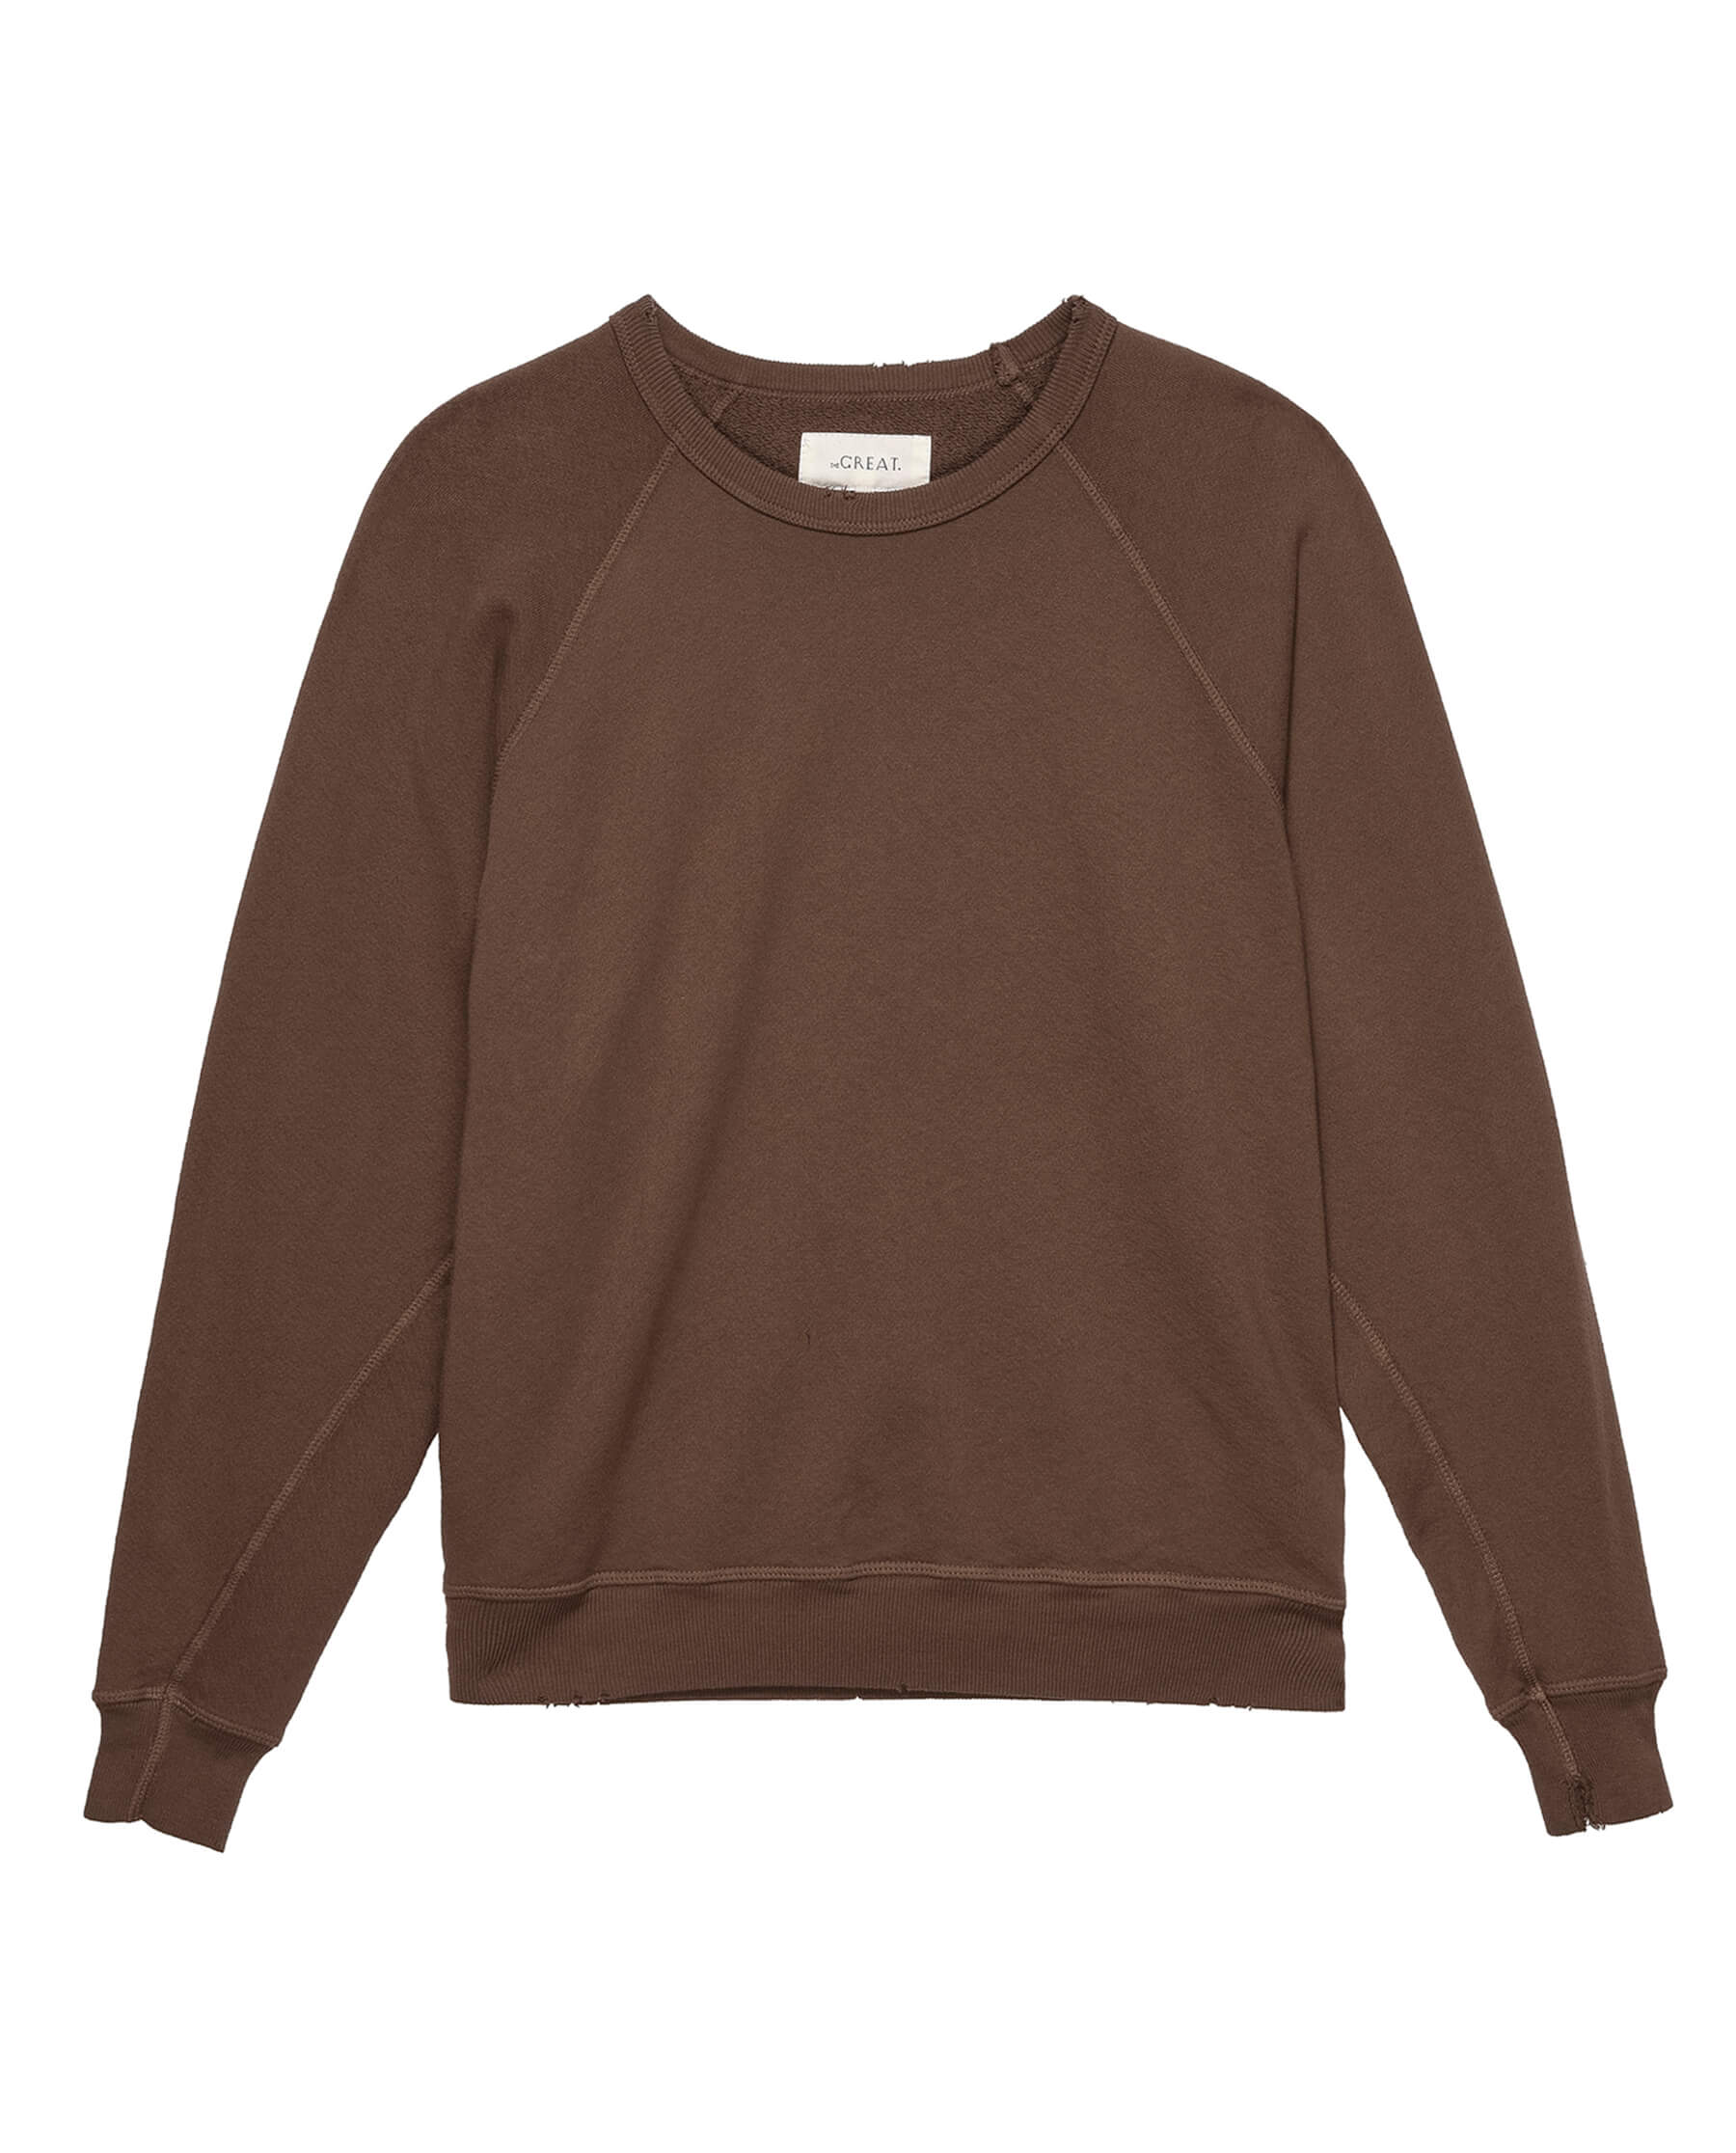 The College Sweatshirt. Solid -- Hickory SWEATSHIRTS THE GREAT. FALL 23 KNITS